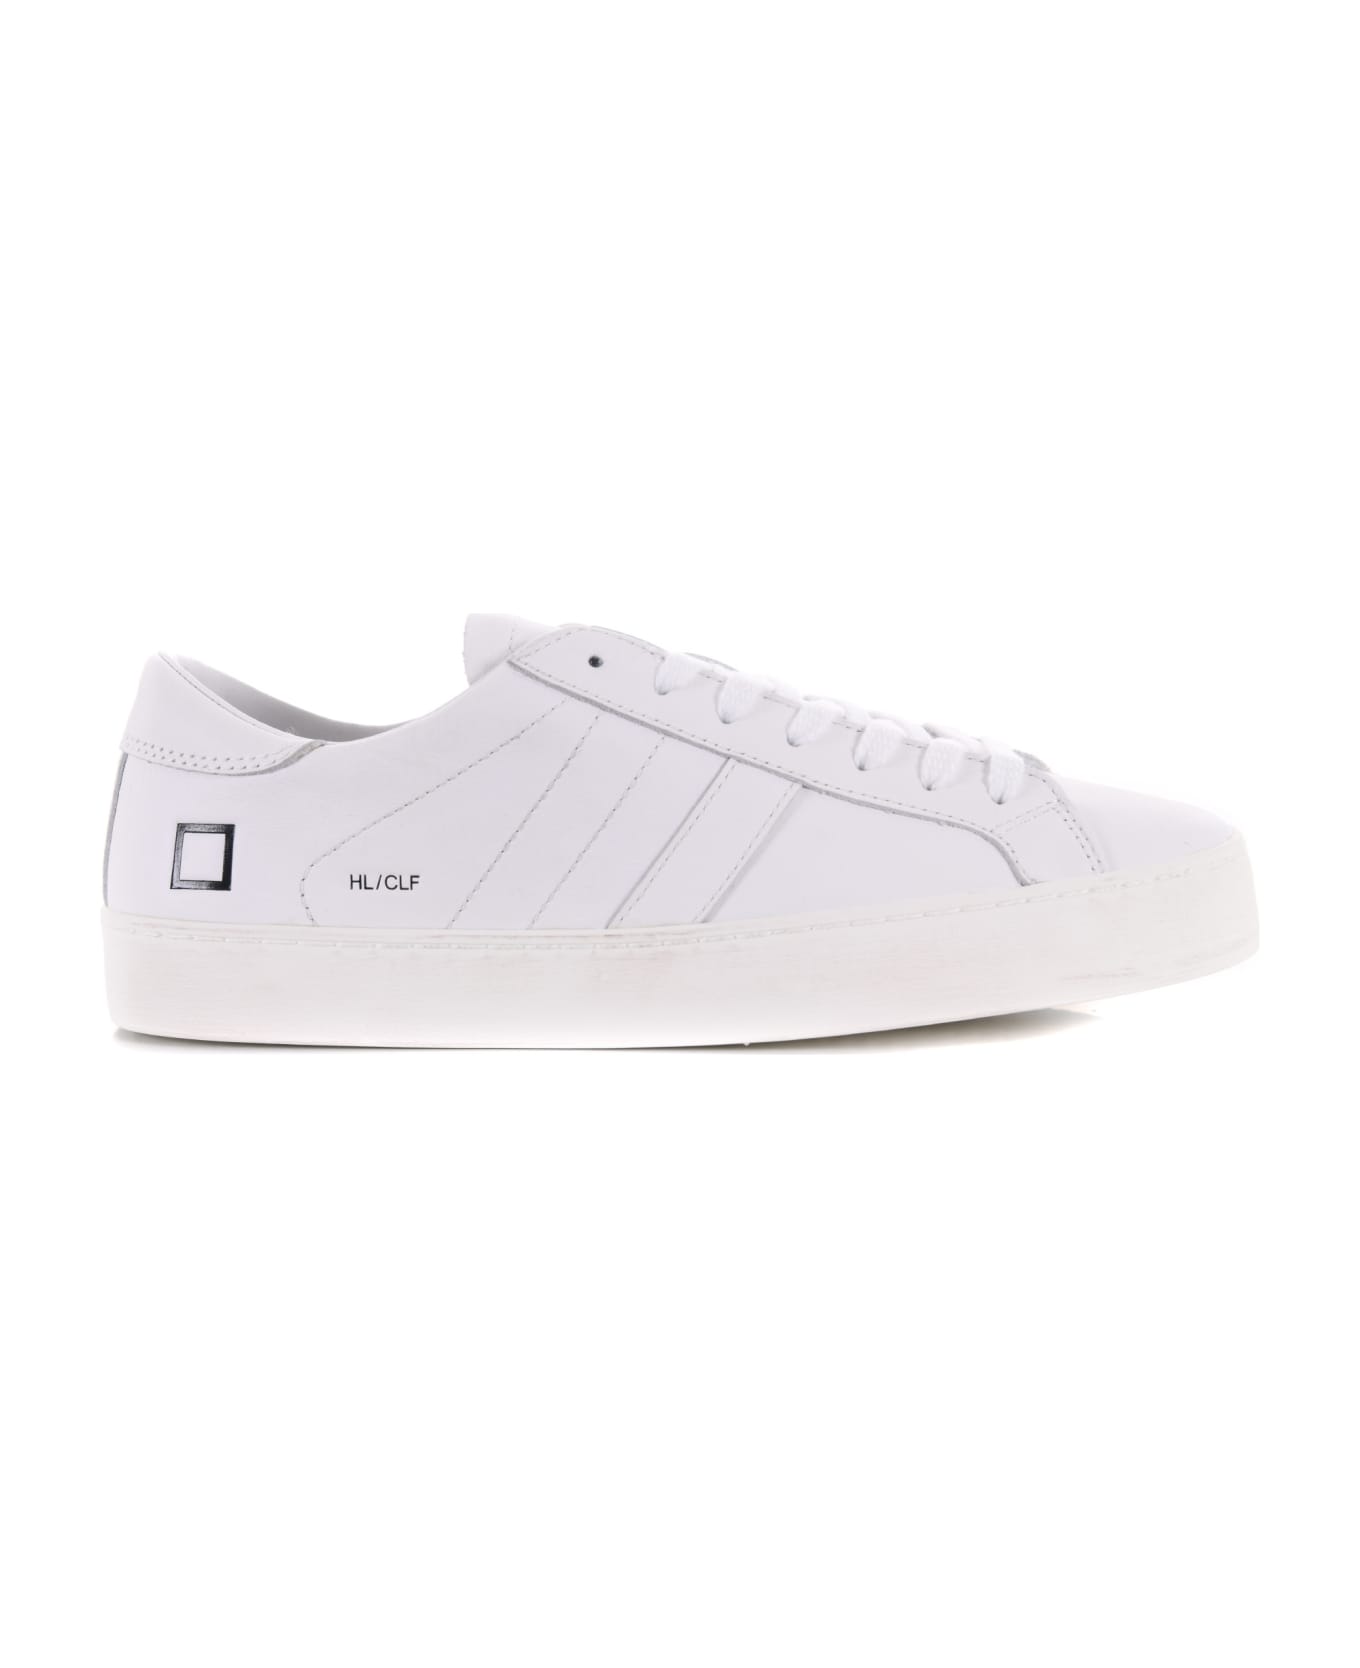 D.A.T.E. Men's Sneakers In Leather - Bianco スニーカー